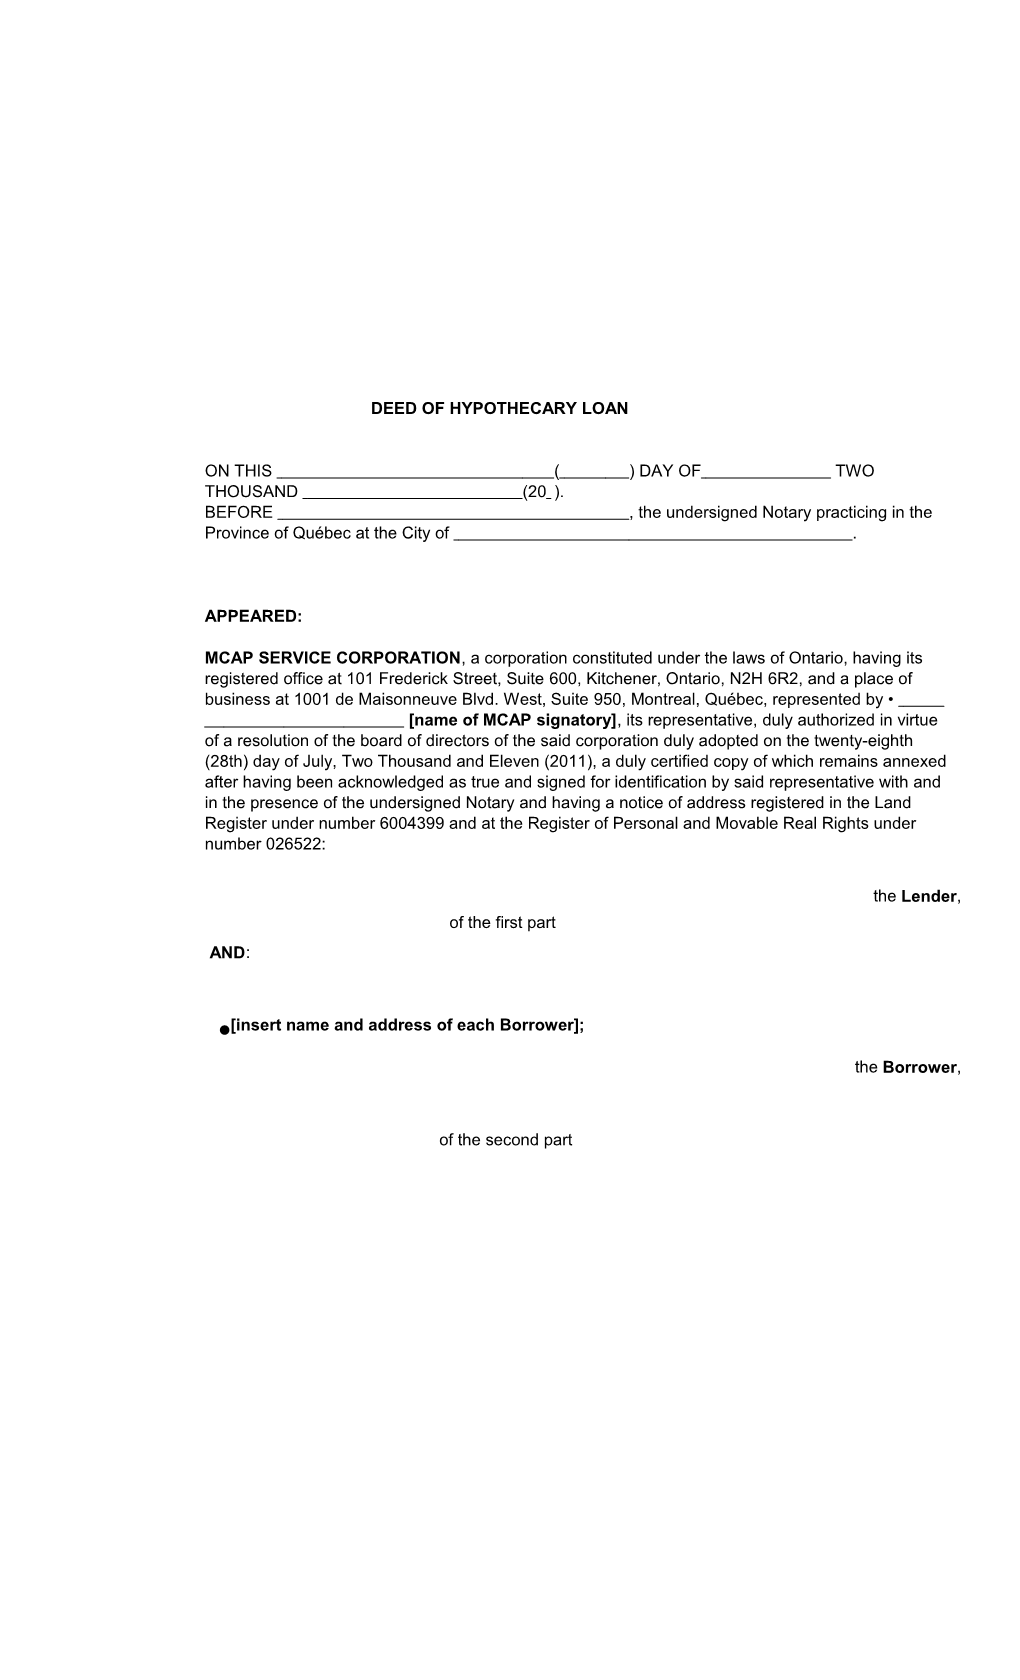 Deed of Hypothecary Loan